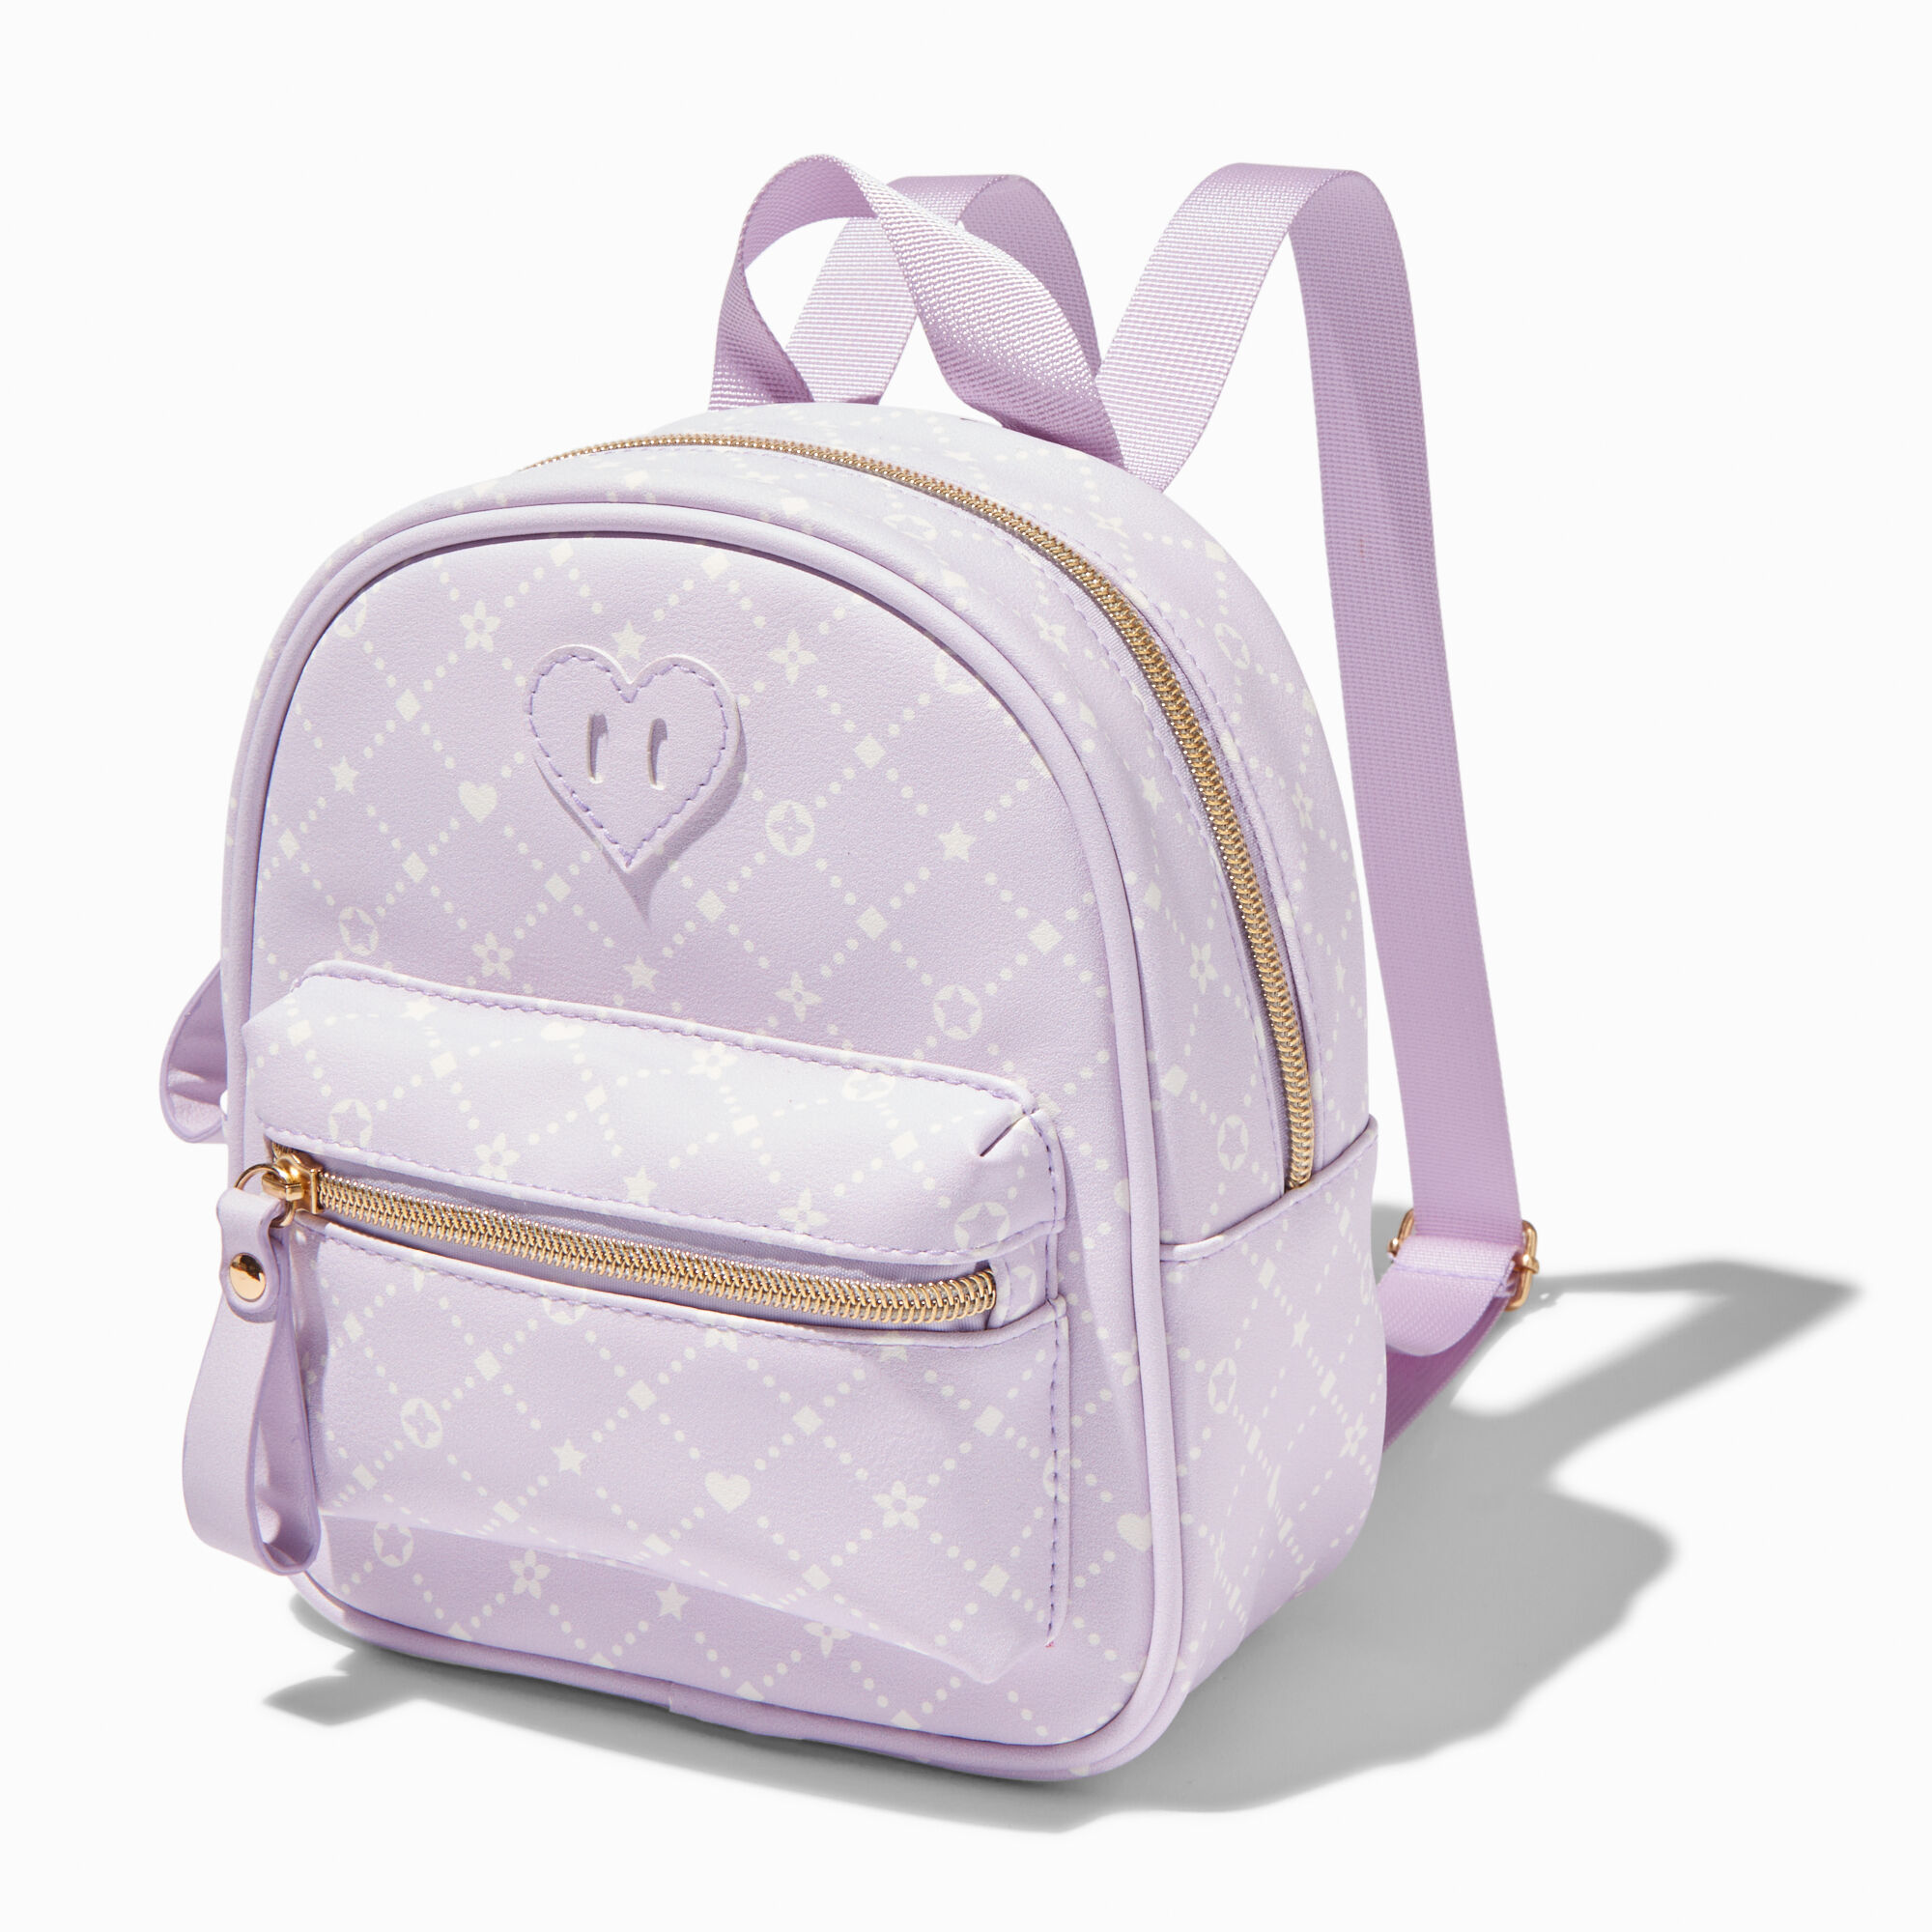 View Claires Club Status Icon Mini Backpack Lilac information